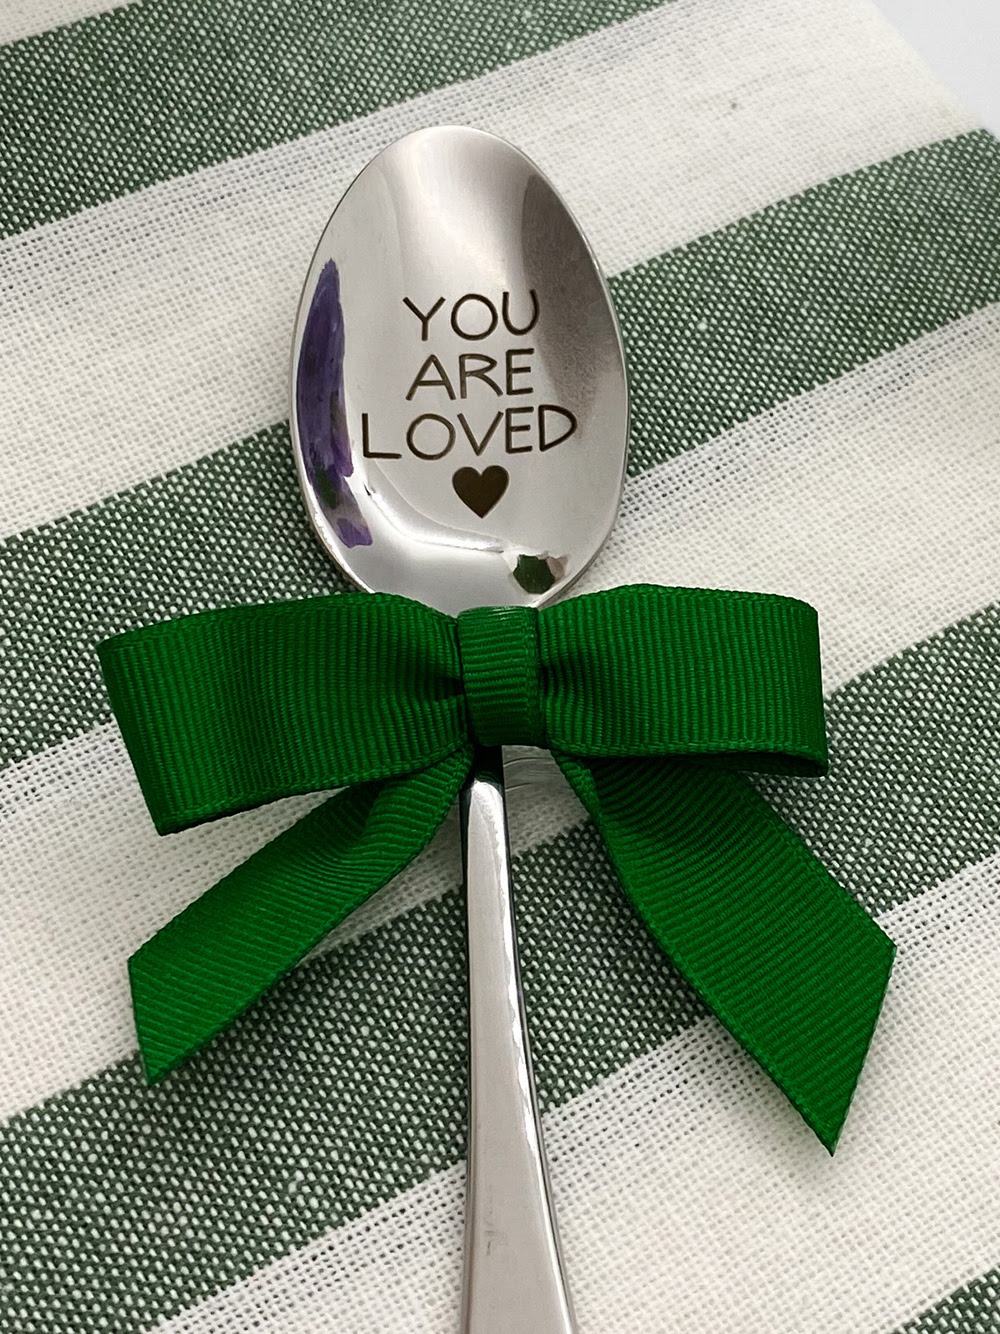 Only a Few Days Left to Order our Engraved Spoons